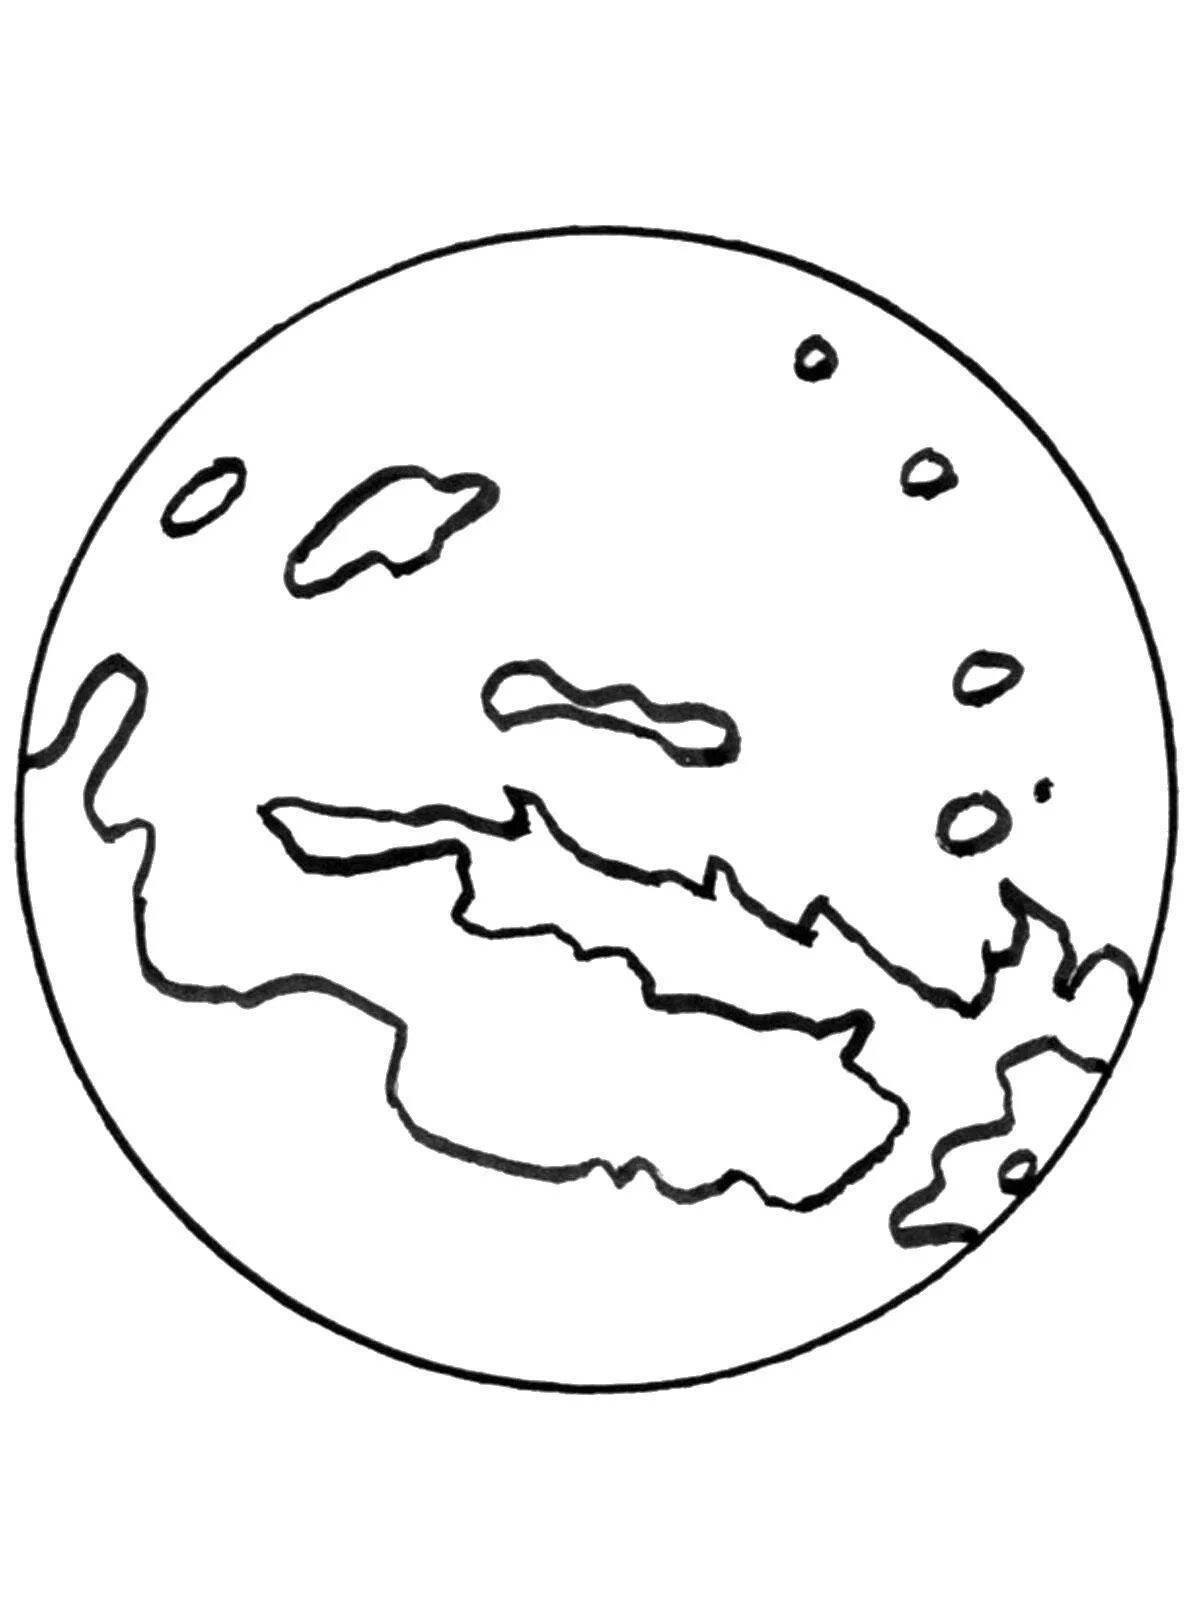 Coloring page witty planet mars